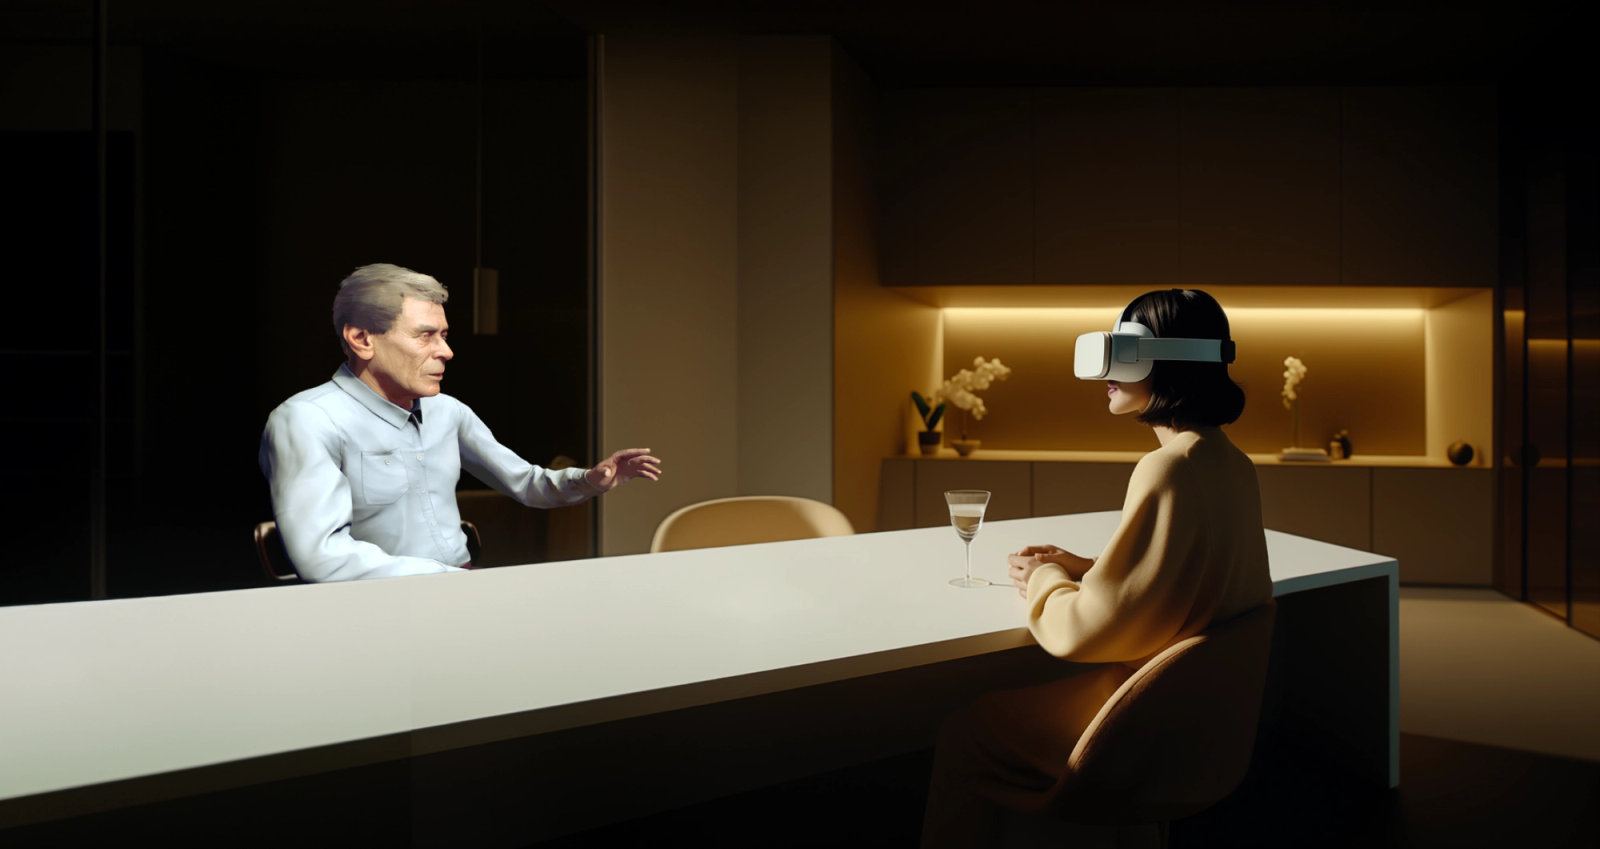 Shaping the future of work with immersive learning